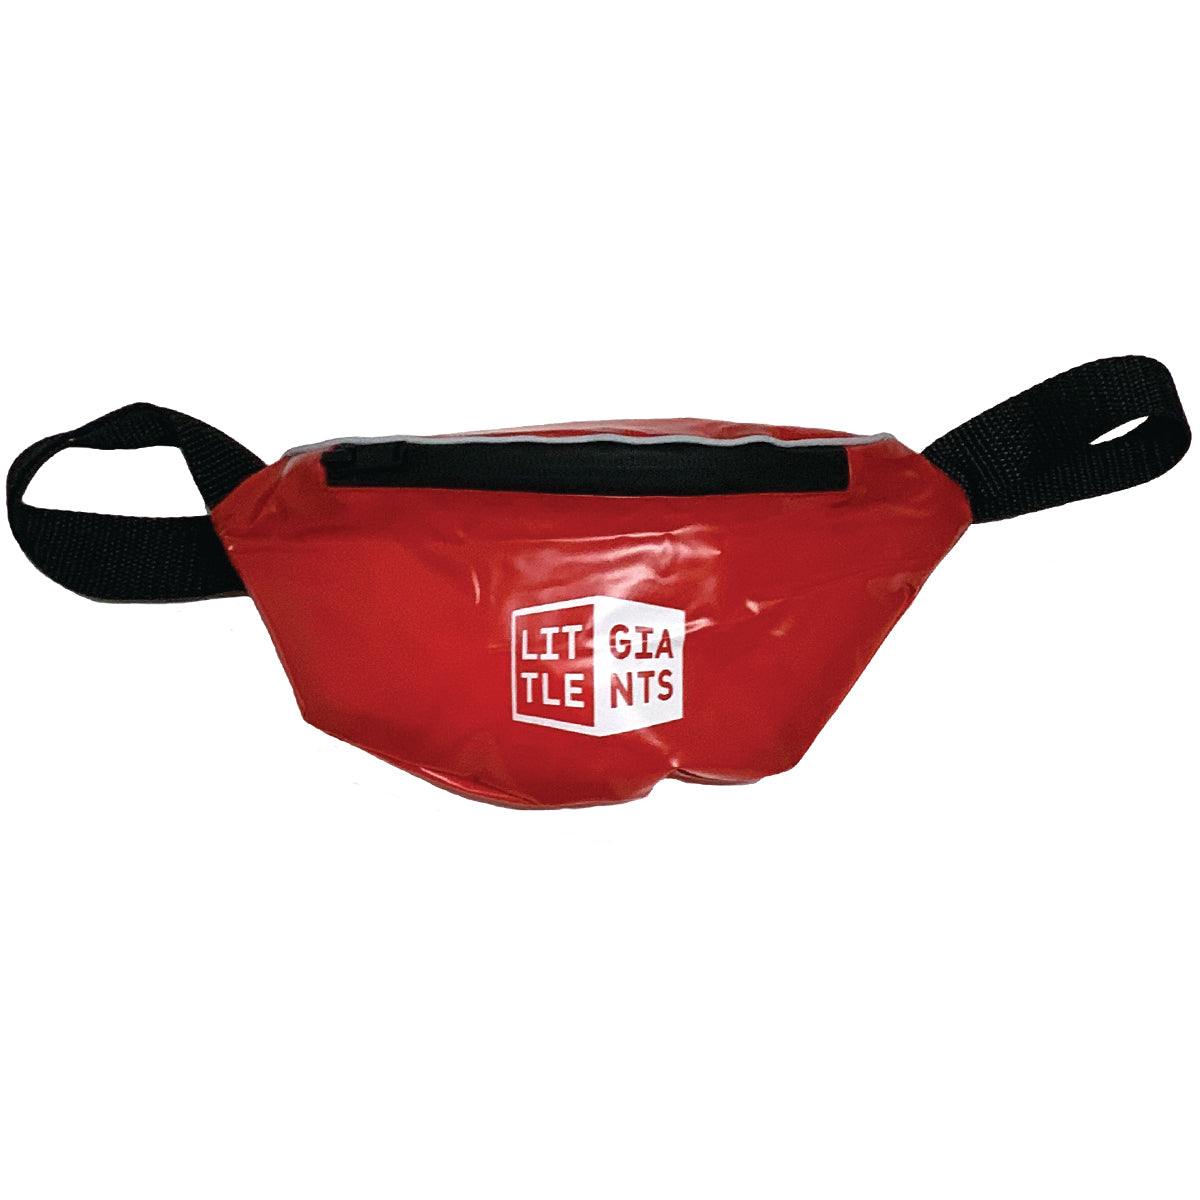 Kids Sized Fanny Pack a.k.a The Snack Pack (Red)